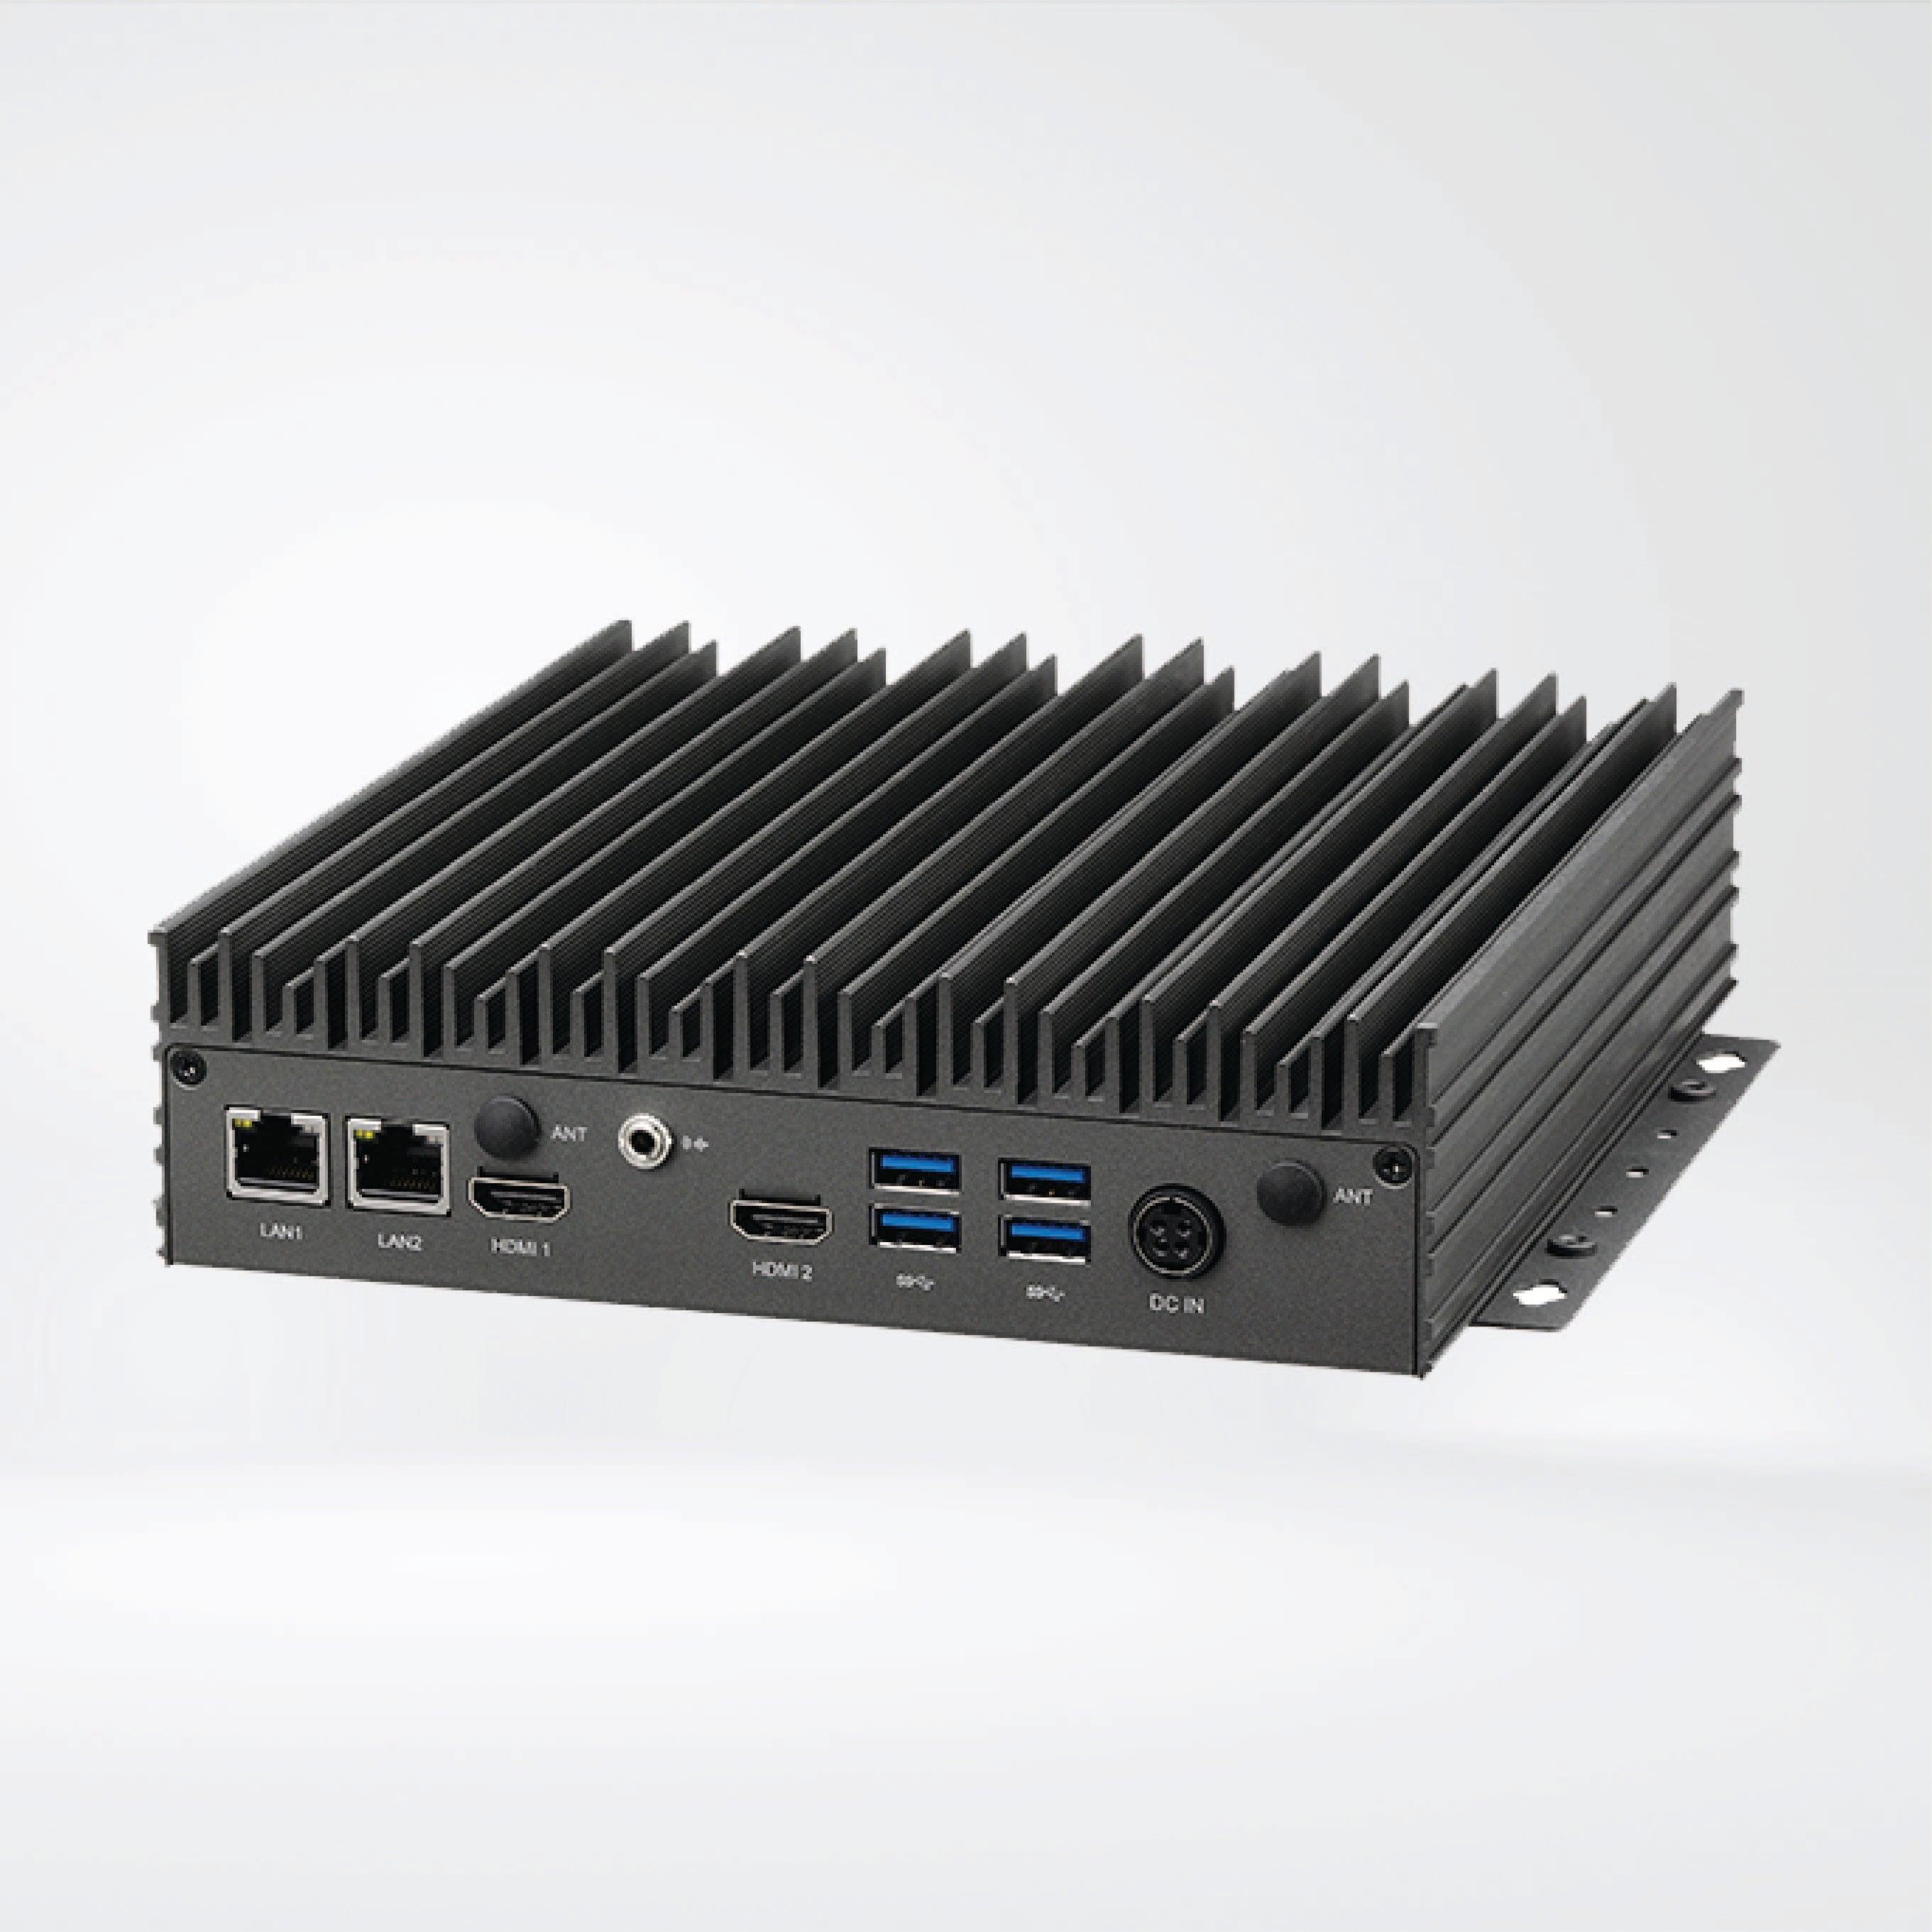 Neu-X300-H310 8th Generation Intel® Core™ processor slim and fanless system with PCH H310 - Riverplus